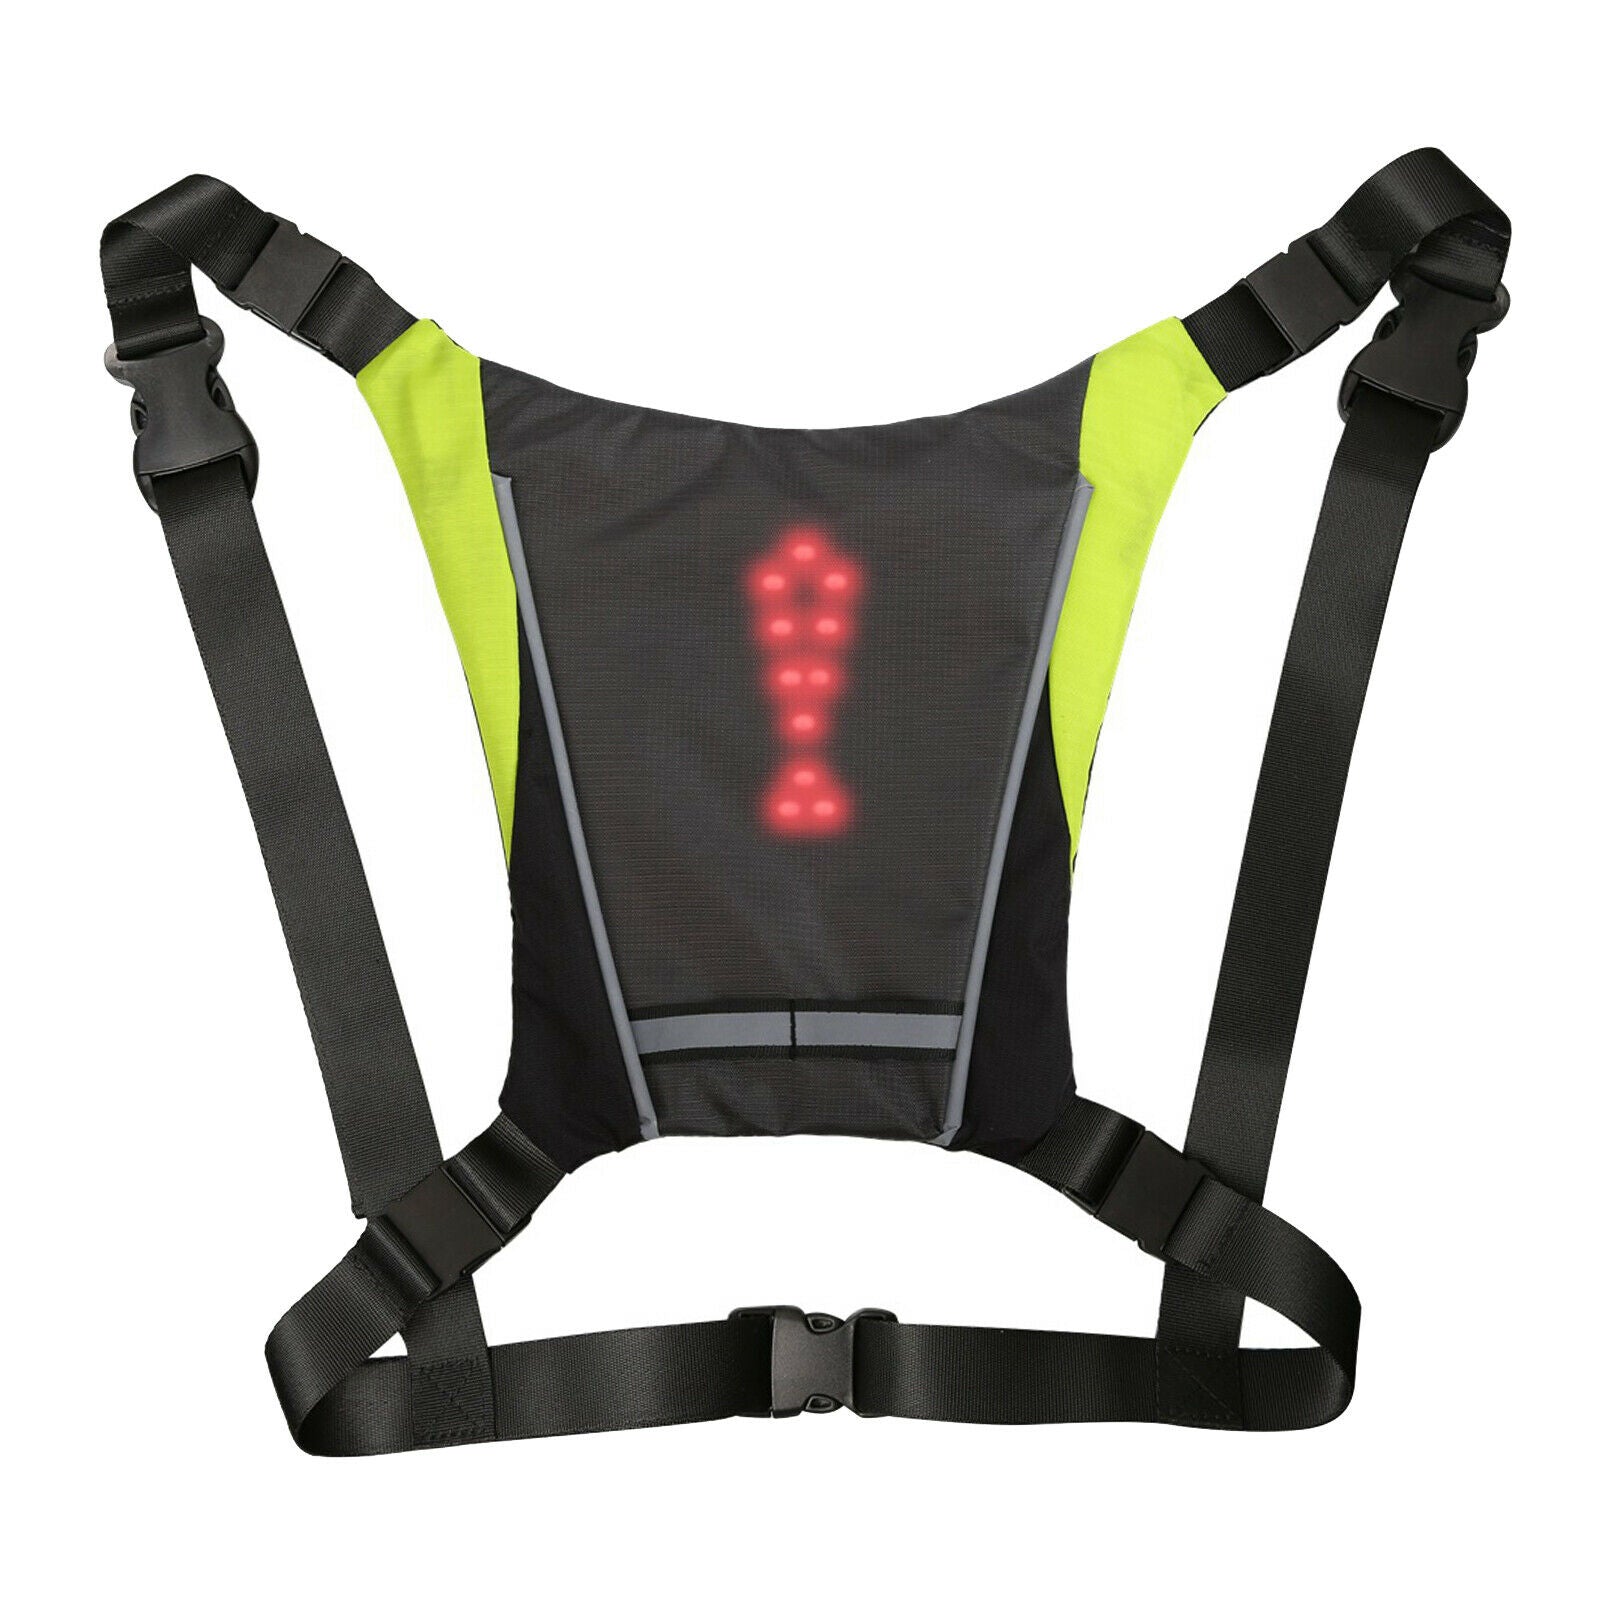 4-Mode Turn Signal Vest Waterproof Remote Direction Indicator Backpack Pack